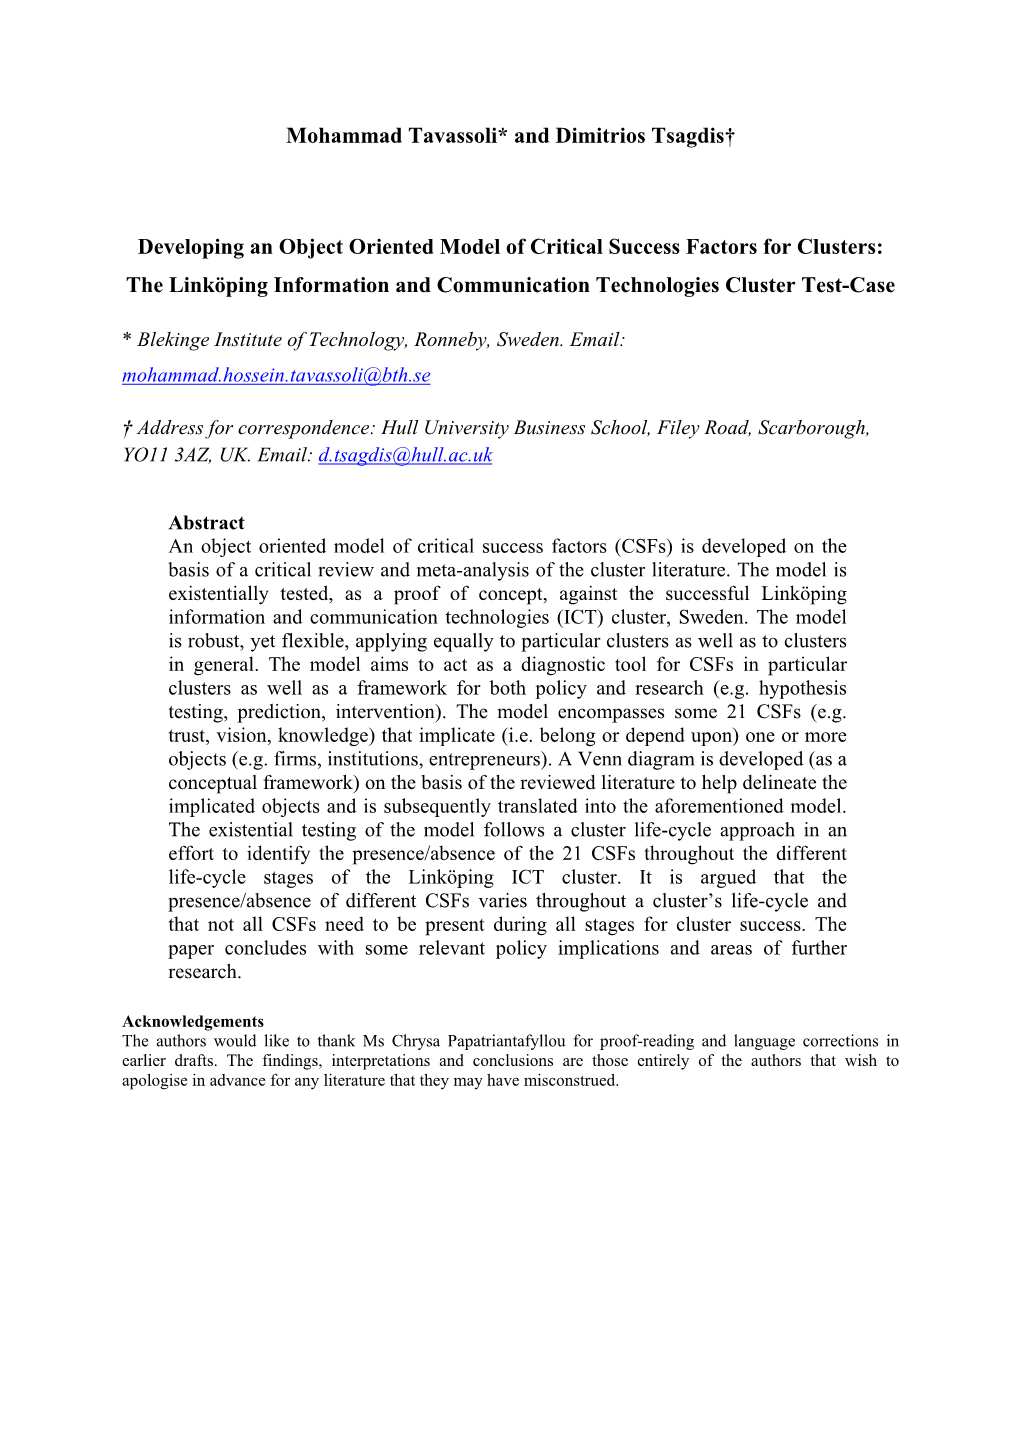 Developing an Object Oriented Framework of Critical Success Factors for Clusters: the Linkoping Information and Communication Te